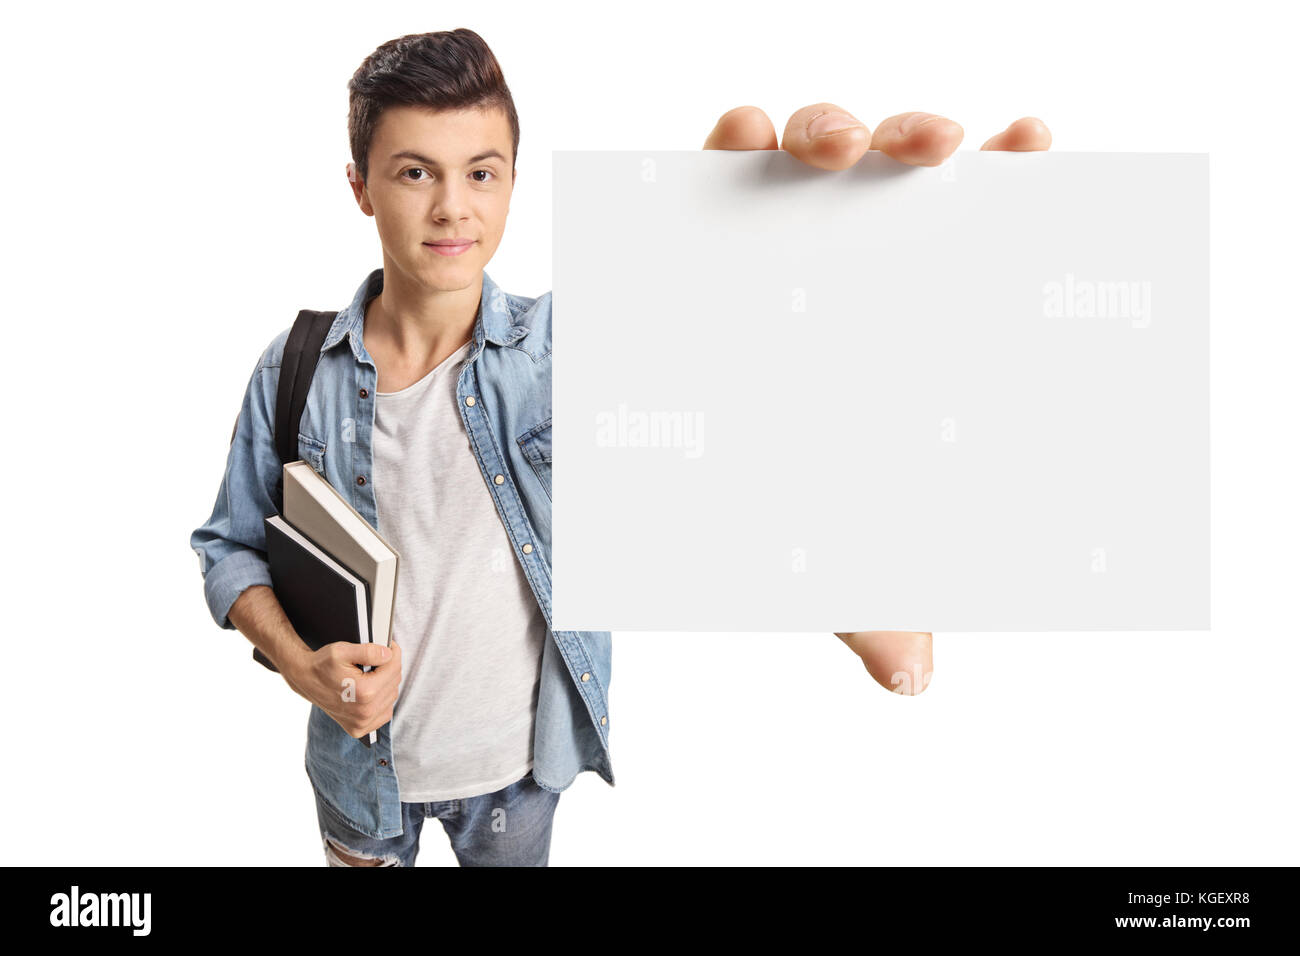 Teenage student showing a blank card isolated on white background Stock Photo